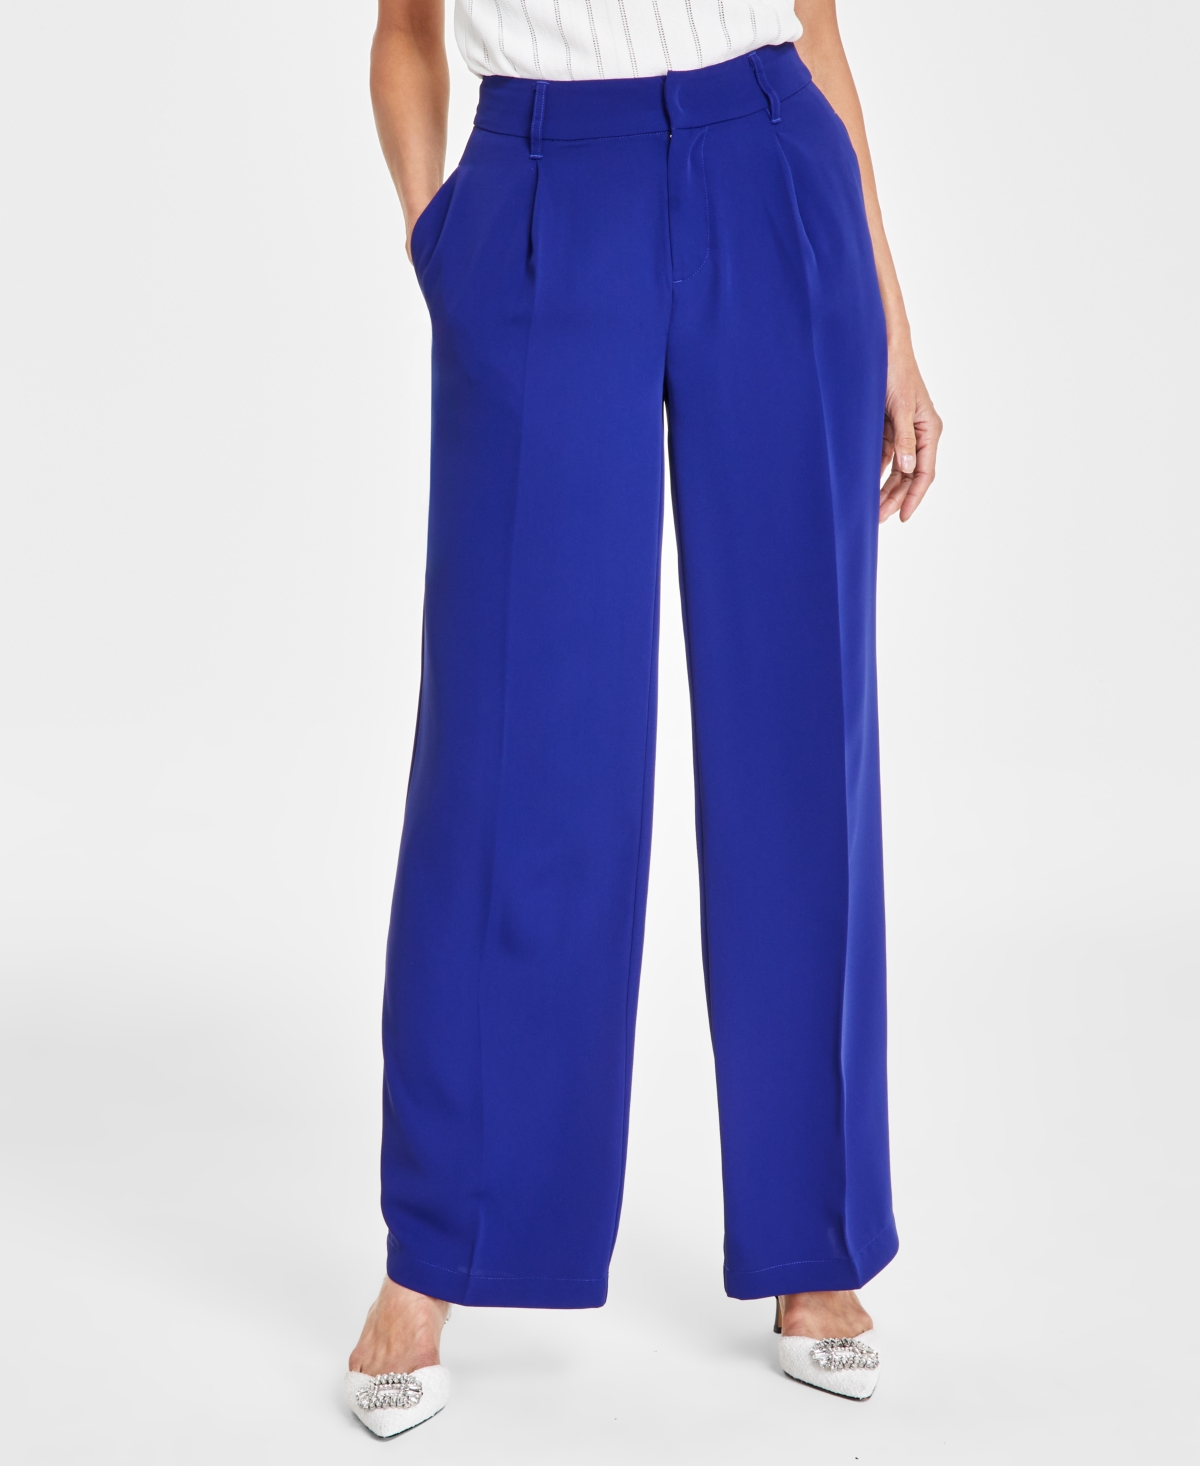 Petite Pleated Wide-Leg Trousers, Created for Macy's - Sapphire Crush